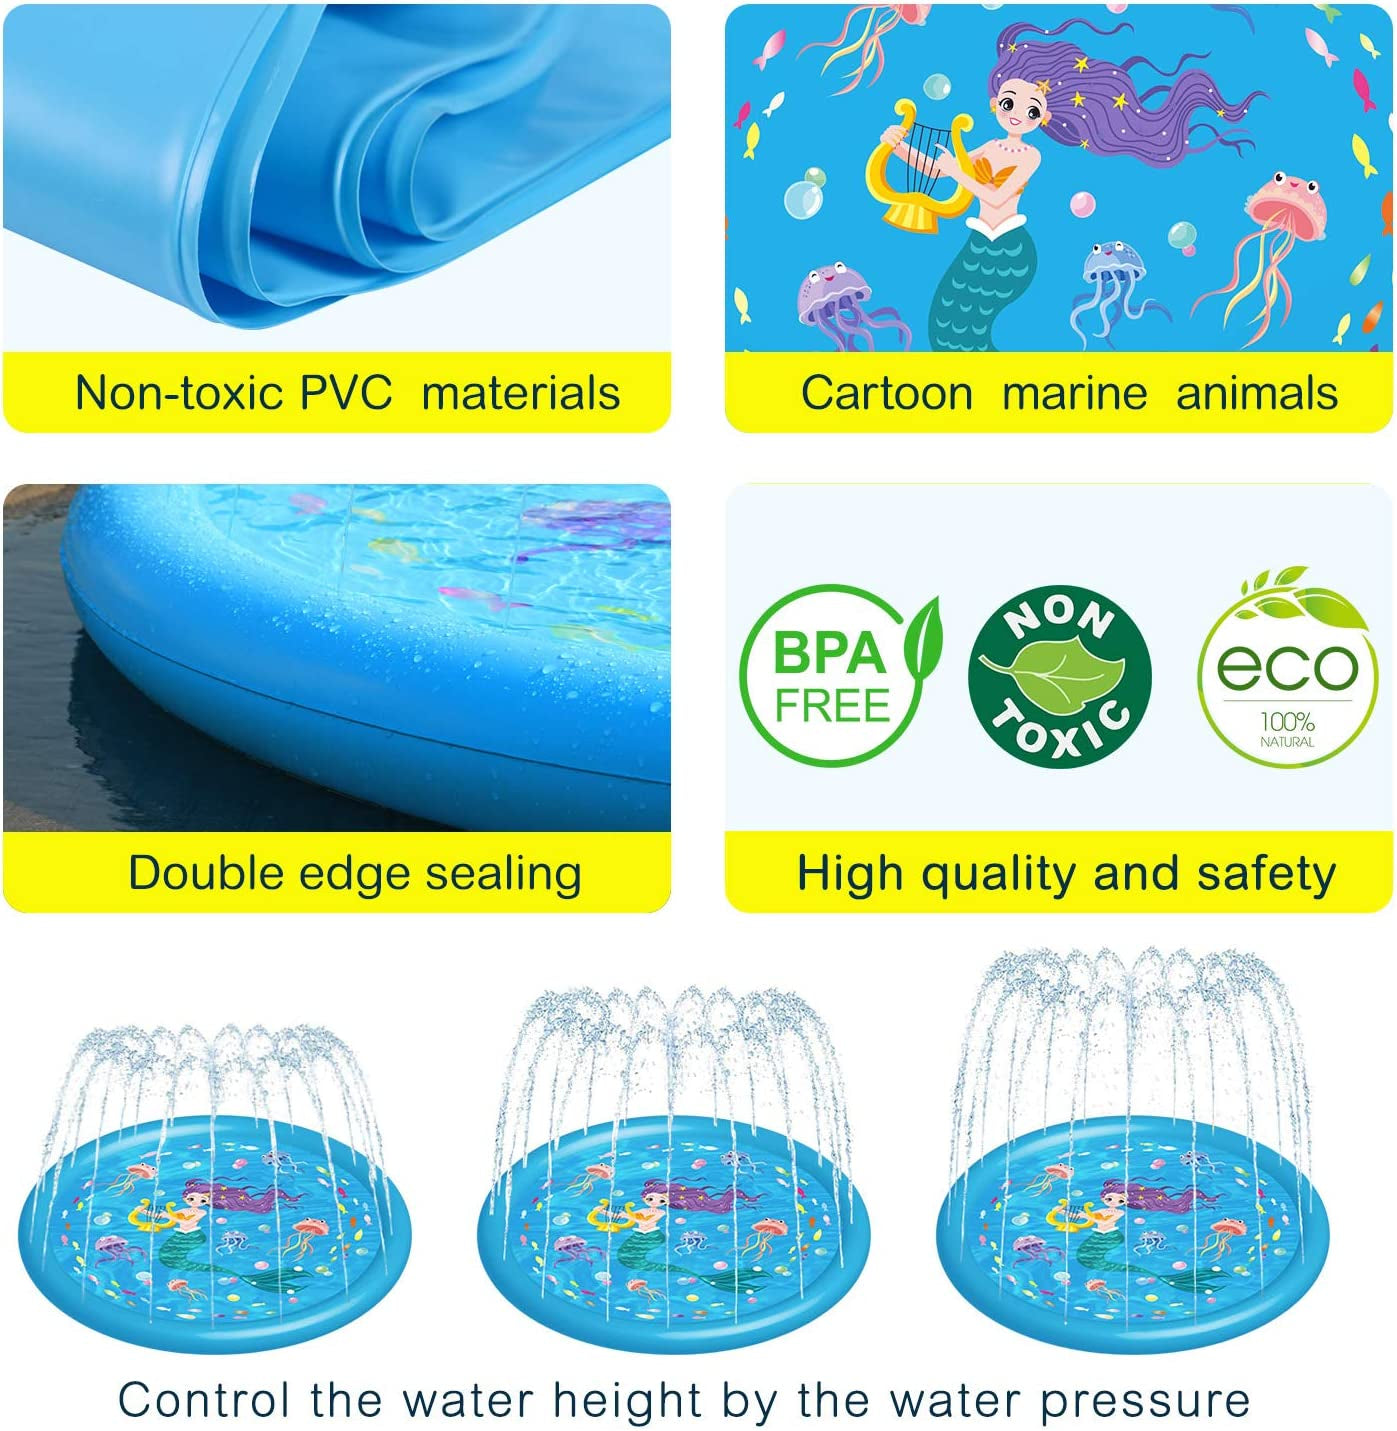 60" 3-in-1 Splash Pad: Perfect Water Toy for Toddlers & Kids! 💦 #PoolPartyFun #OutdoorPlay